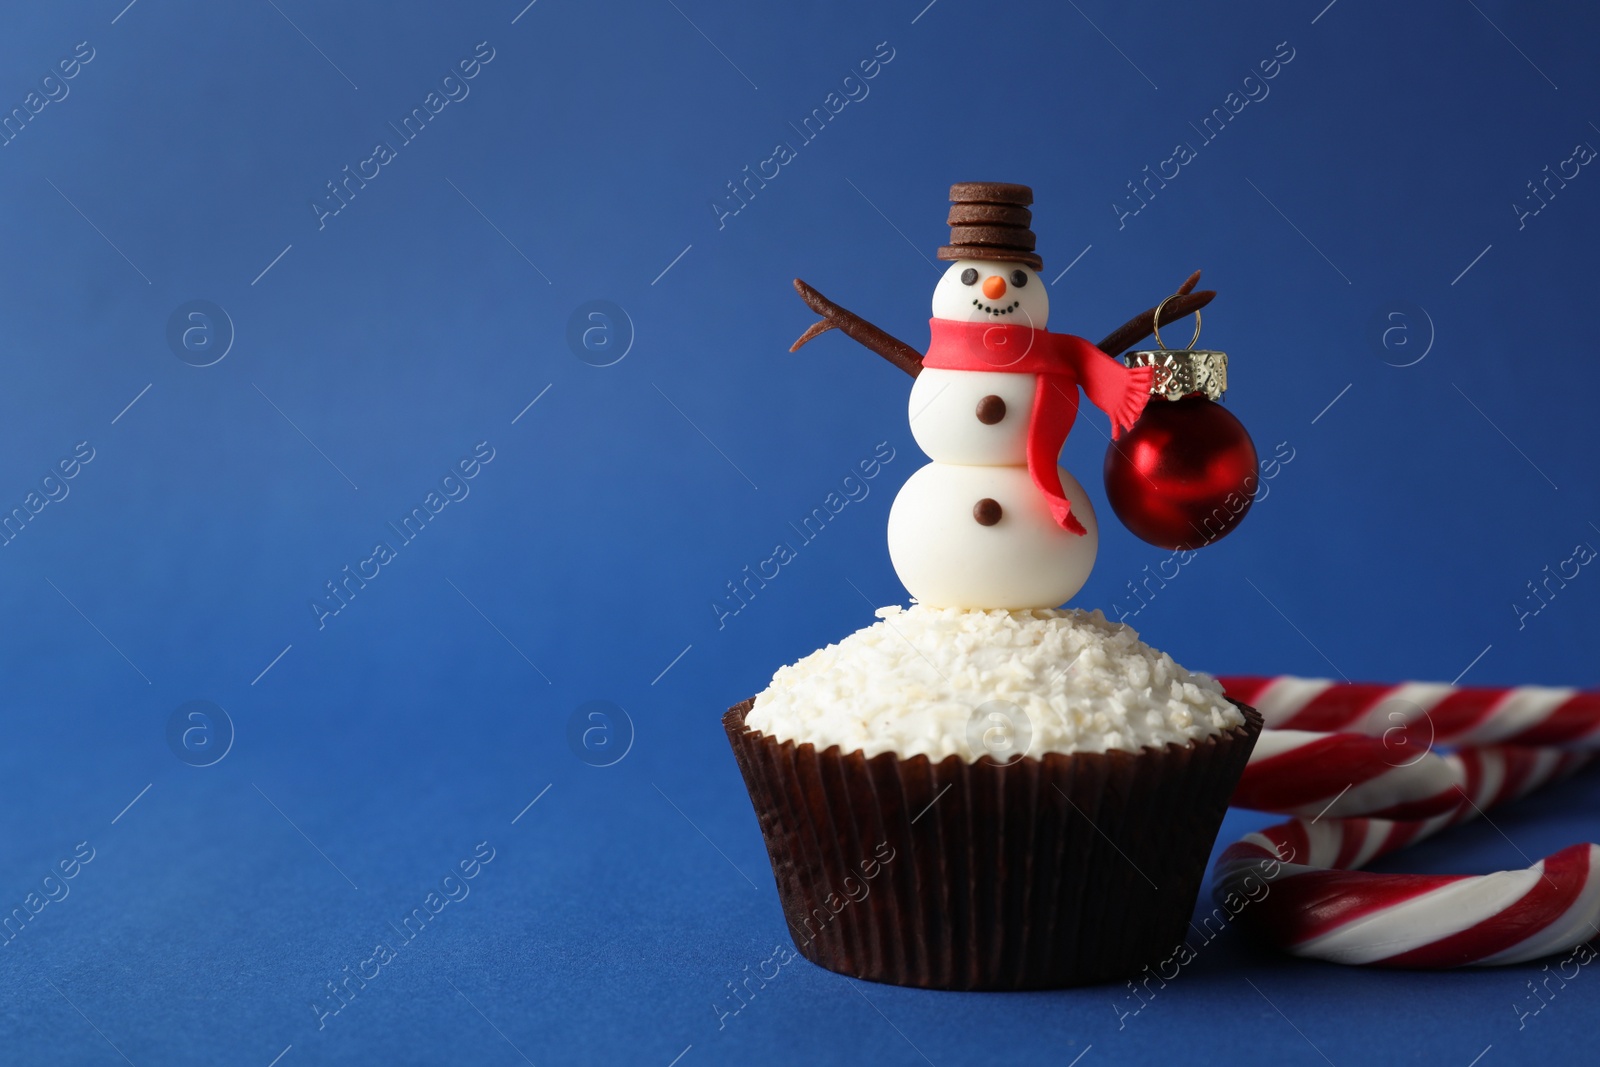 Photo of Tasty cupcake with snowman figure and Christmas bauble on blue background, space for text